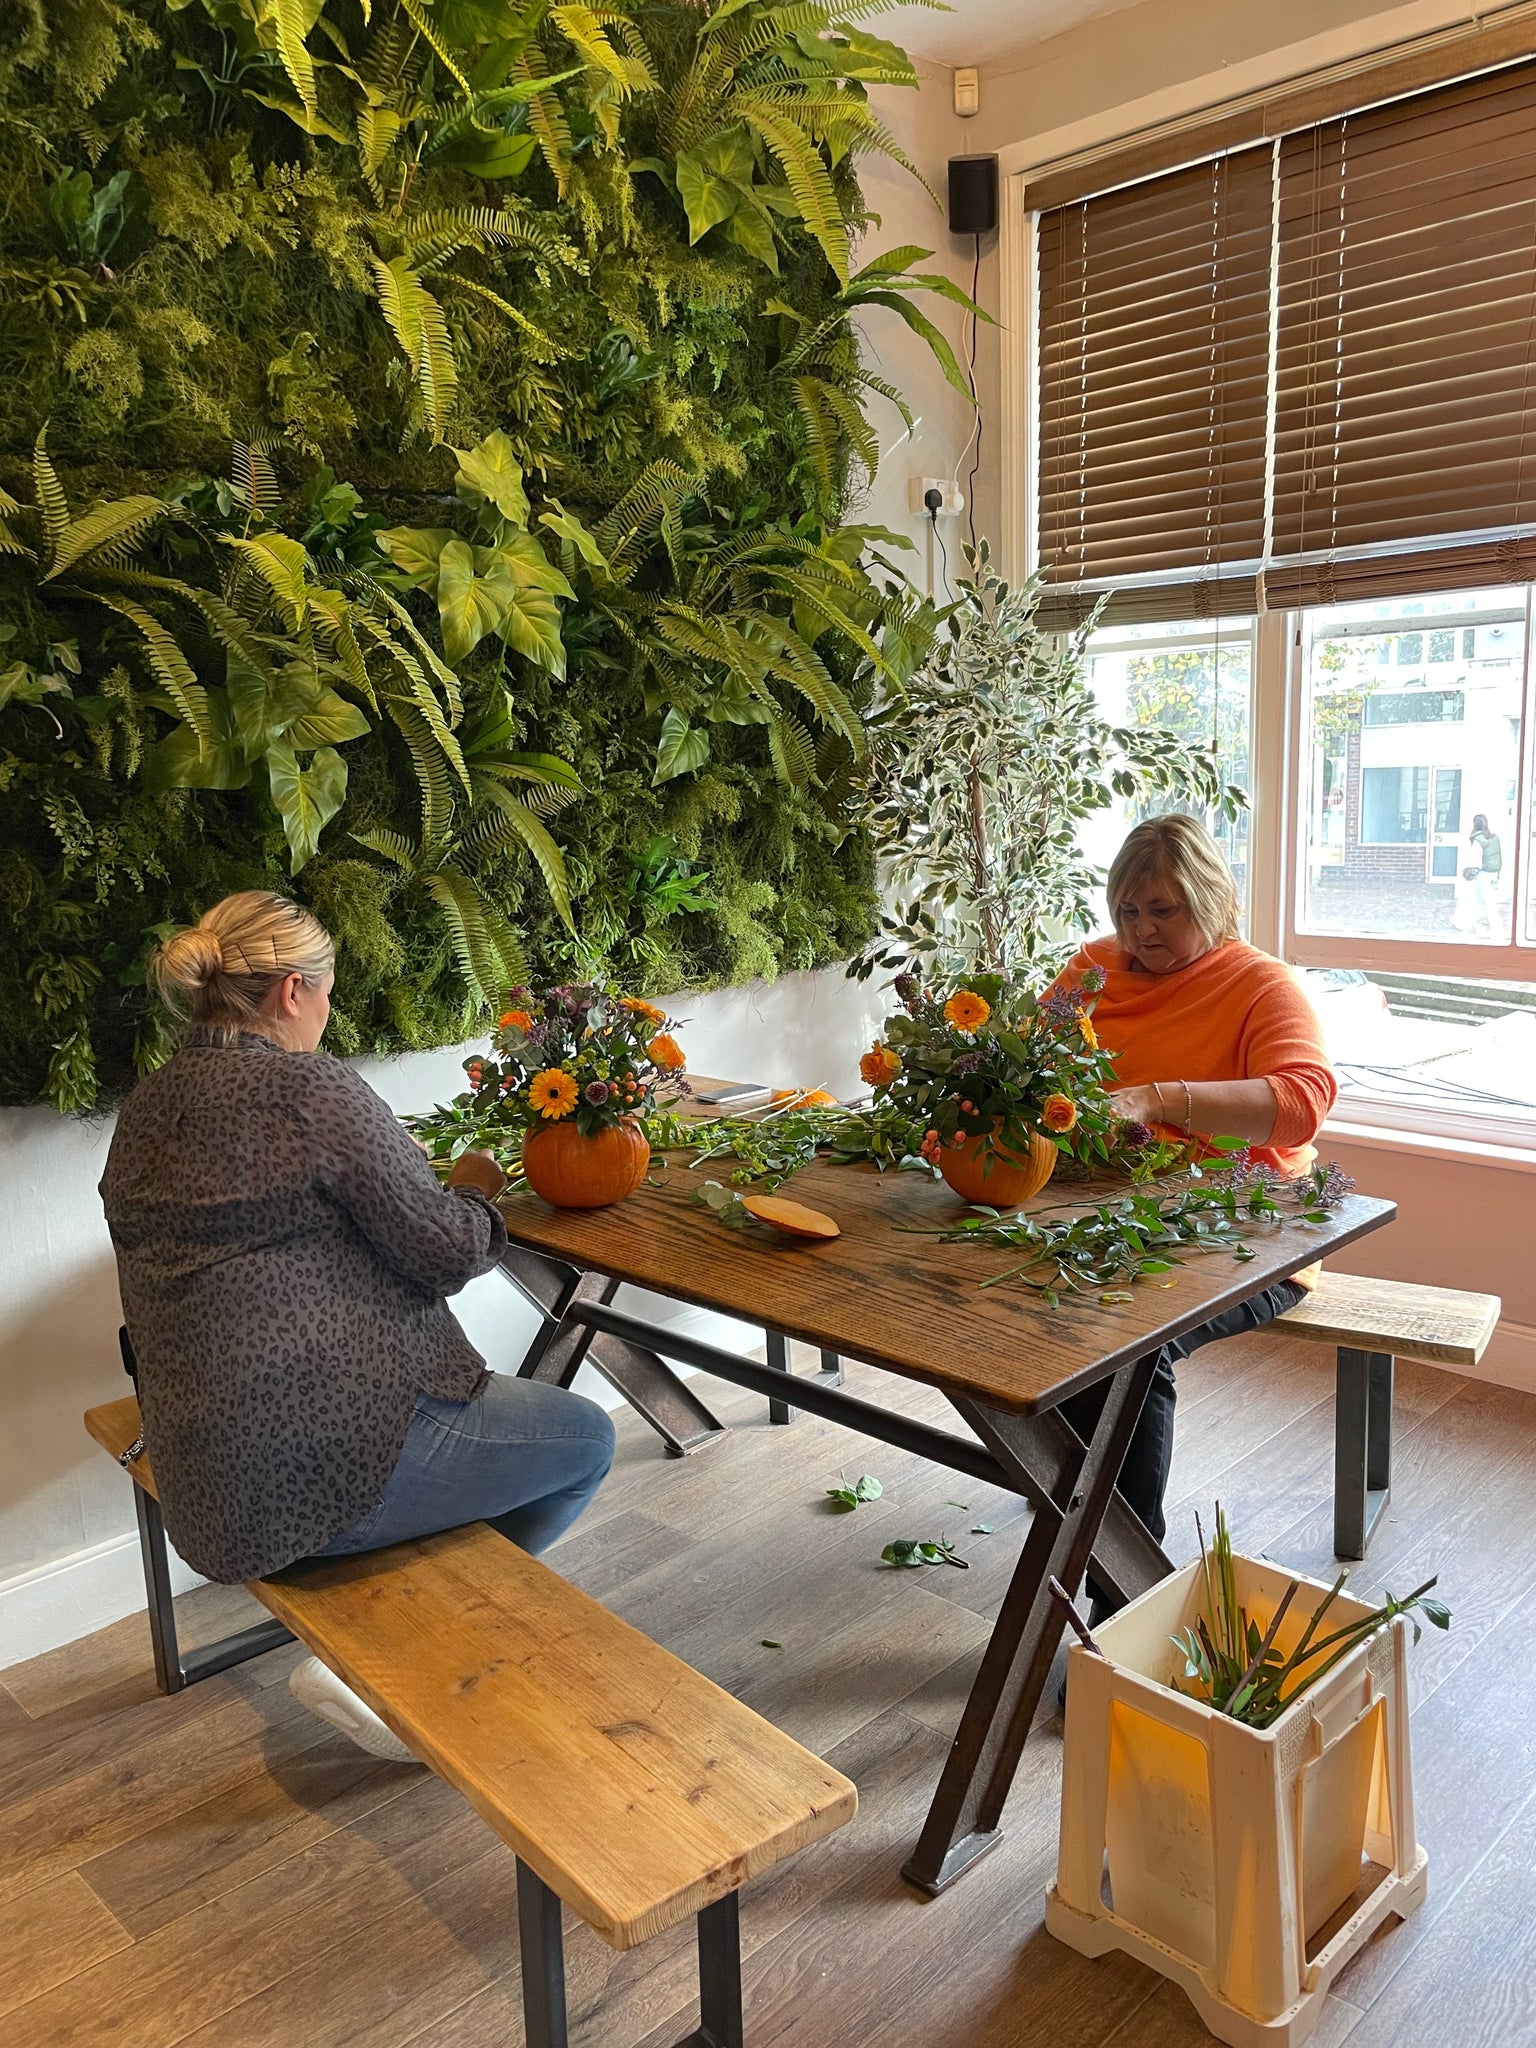 Floral Pumpkin Workshop – Tuesday 31st October, Starting @ 11am (£65 per person): 2 hours